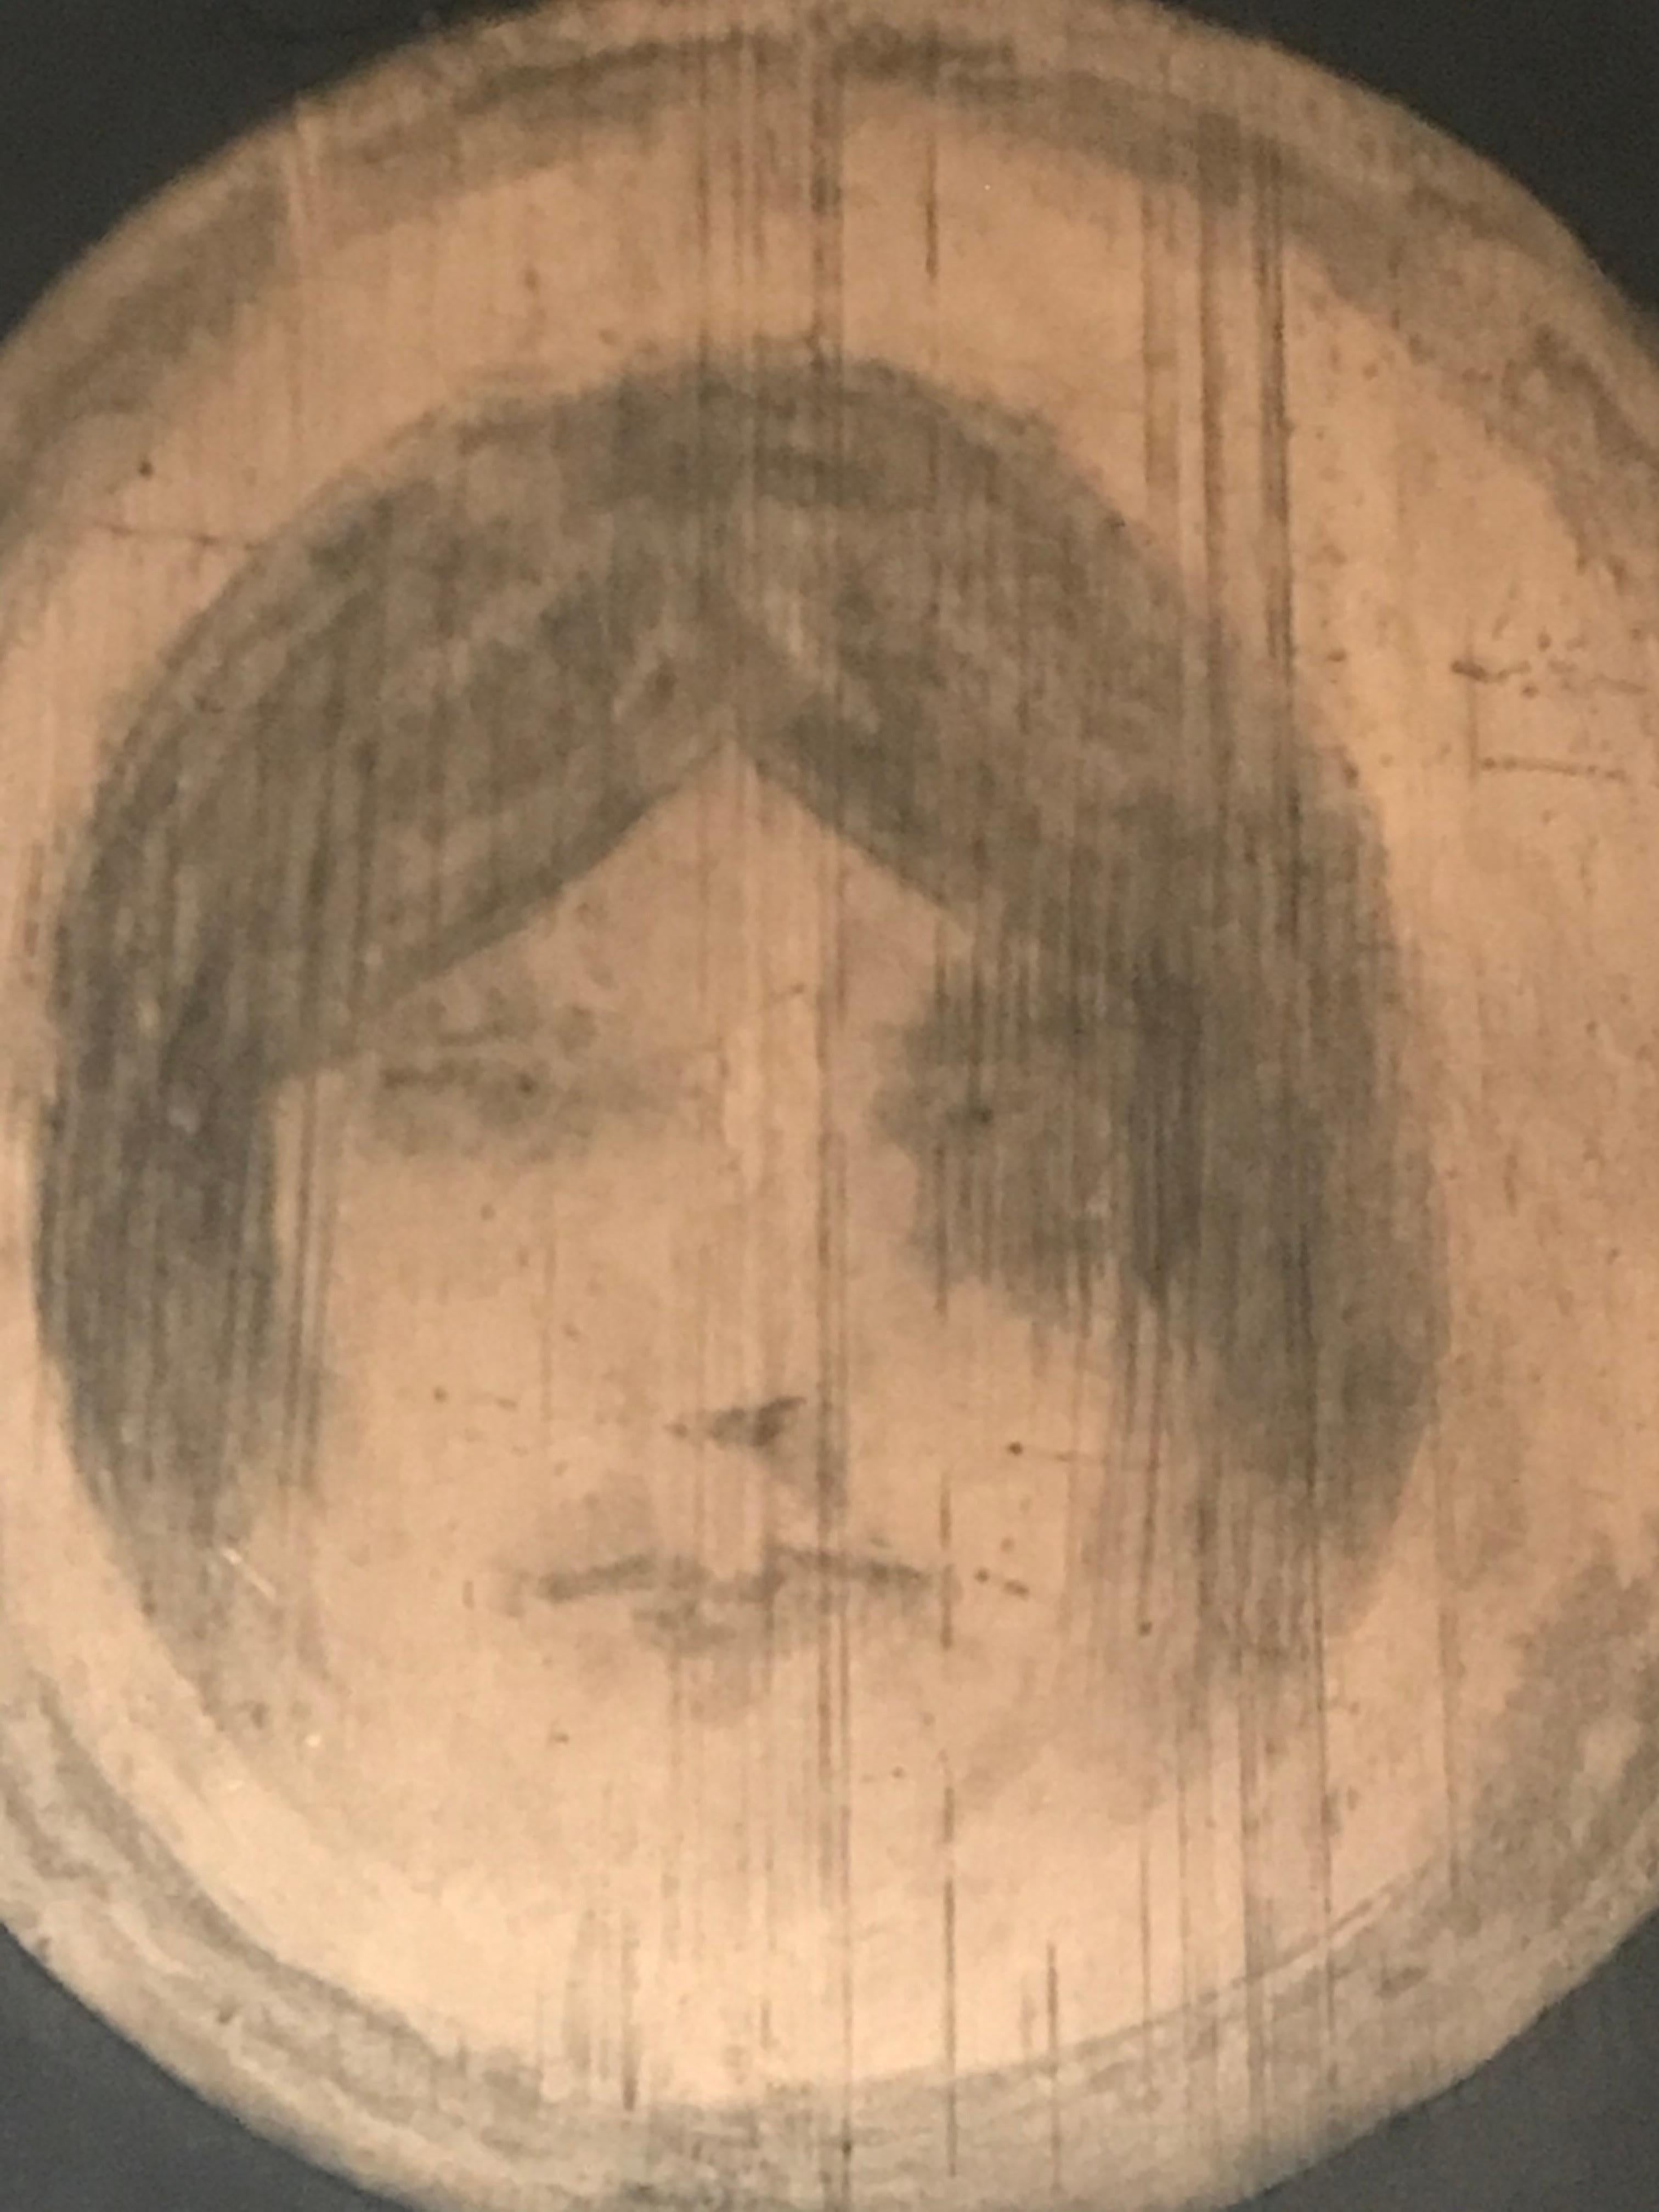 Enigmatic lithograph depicting the face of a woman.
This artwork evokes emotion and mystery, inviting viewers to take an intimate journey into their
own imaginations as they question its hidden meanings. It reveals a unique vision that captures